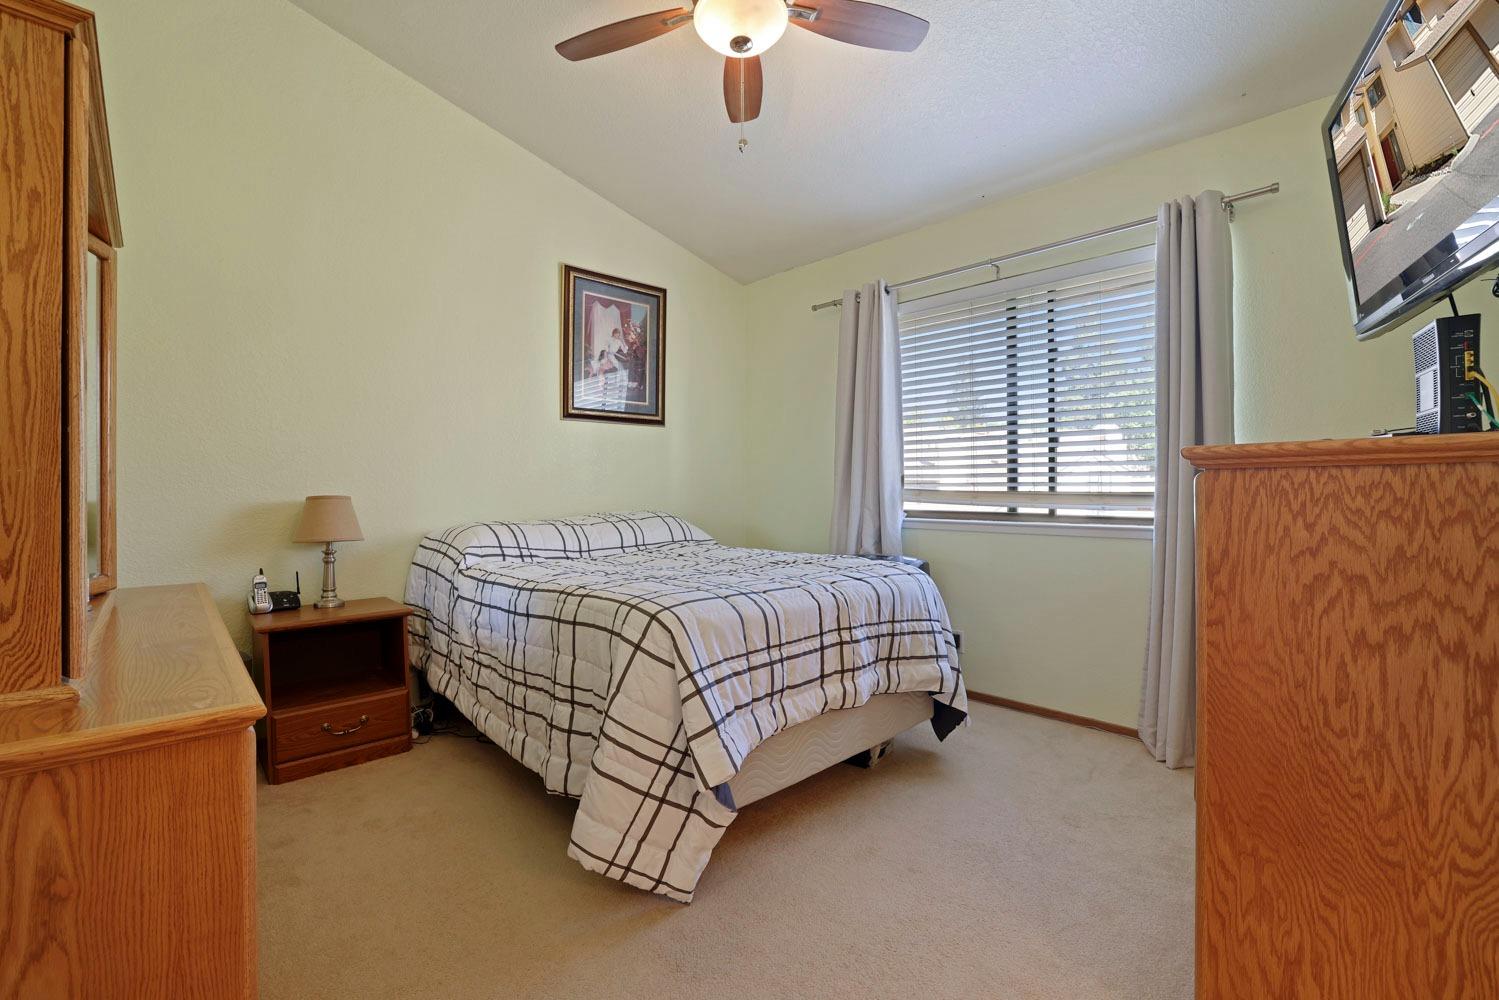 Photo #10 Spacious Primary Bedroom has cathedral ceilings and a beautiful fan to circulate the cool air in the evenings.